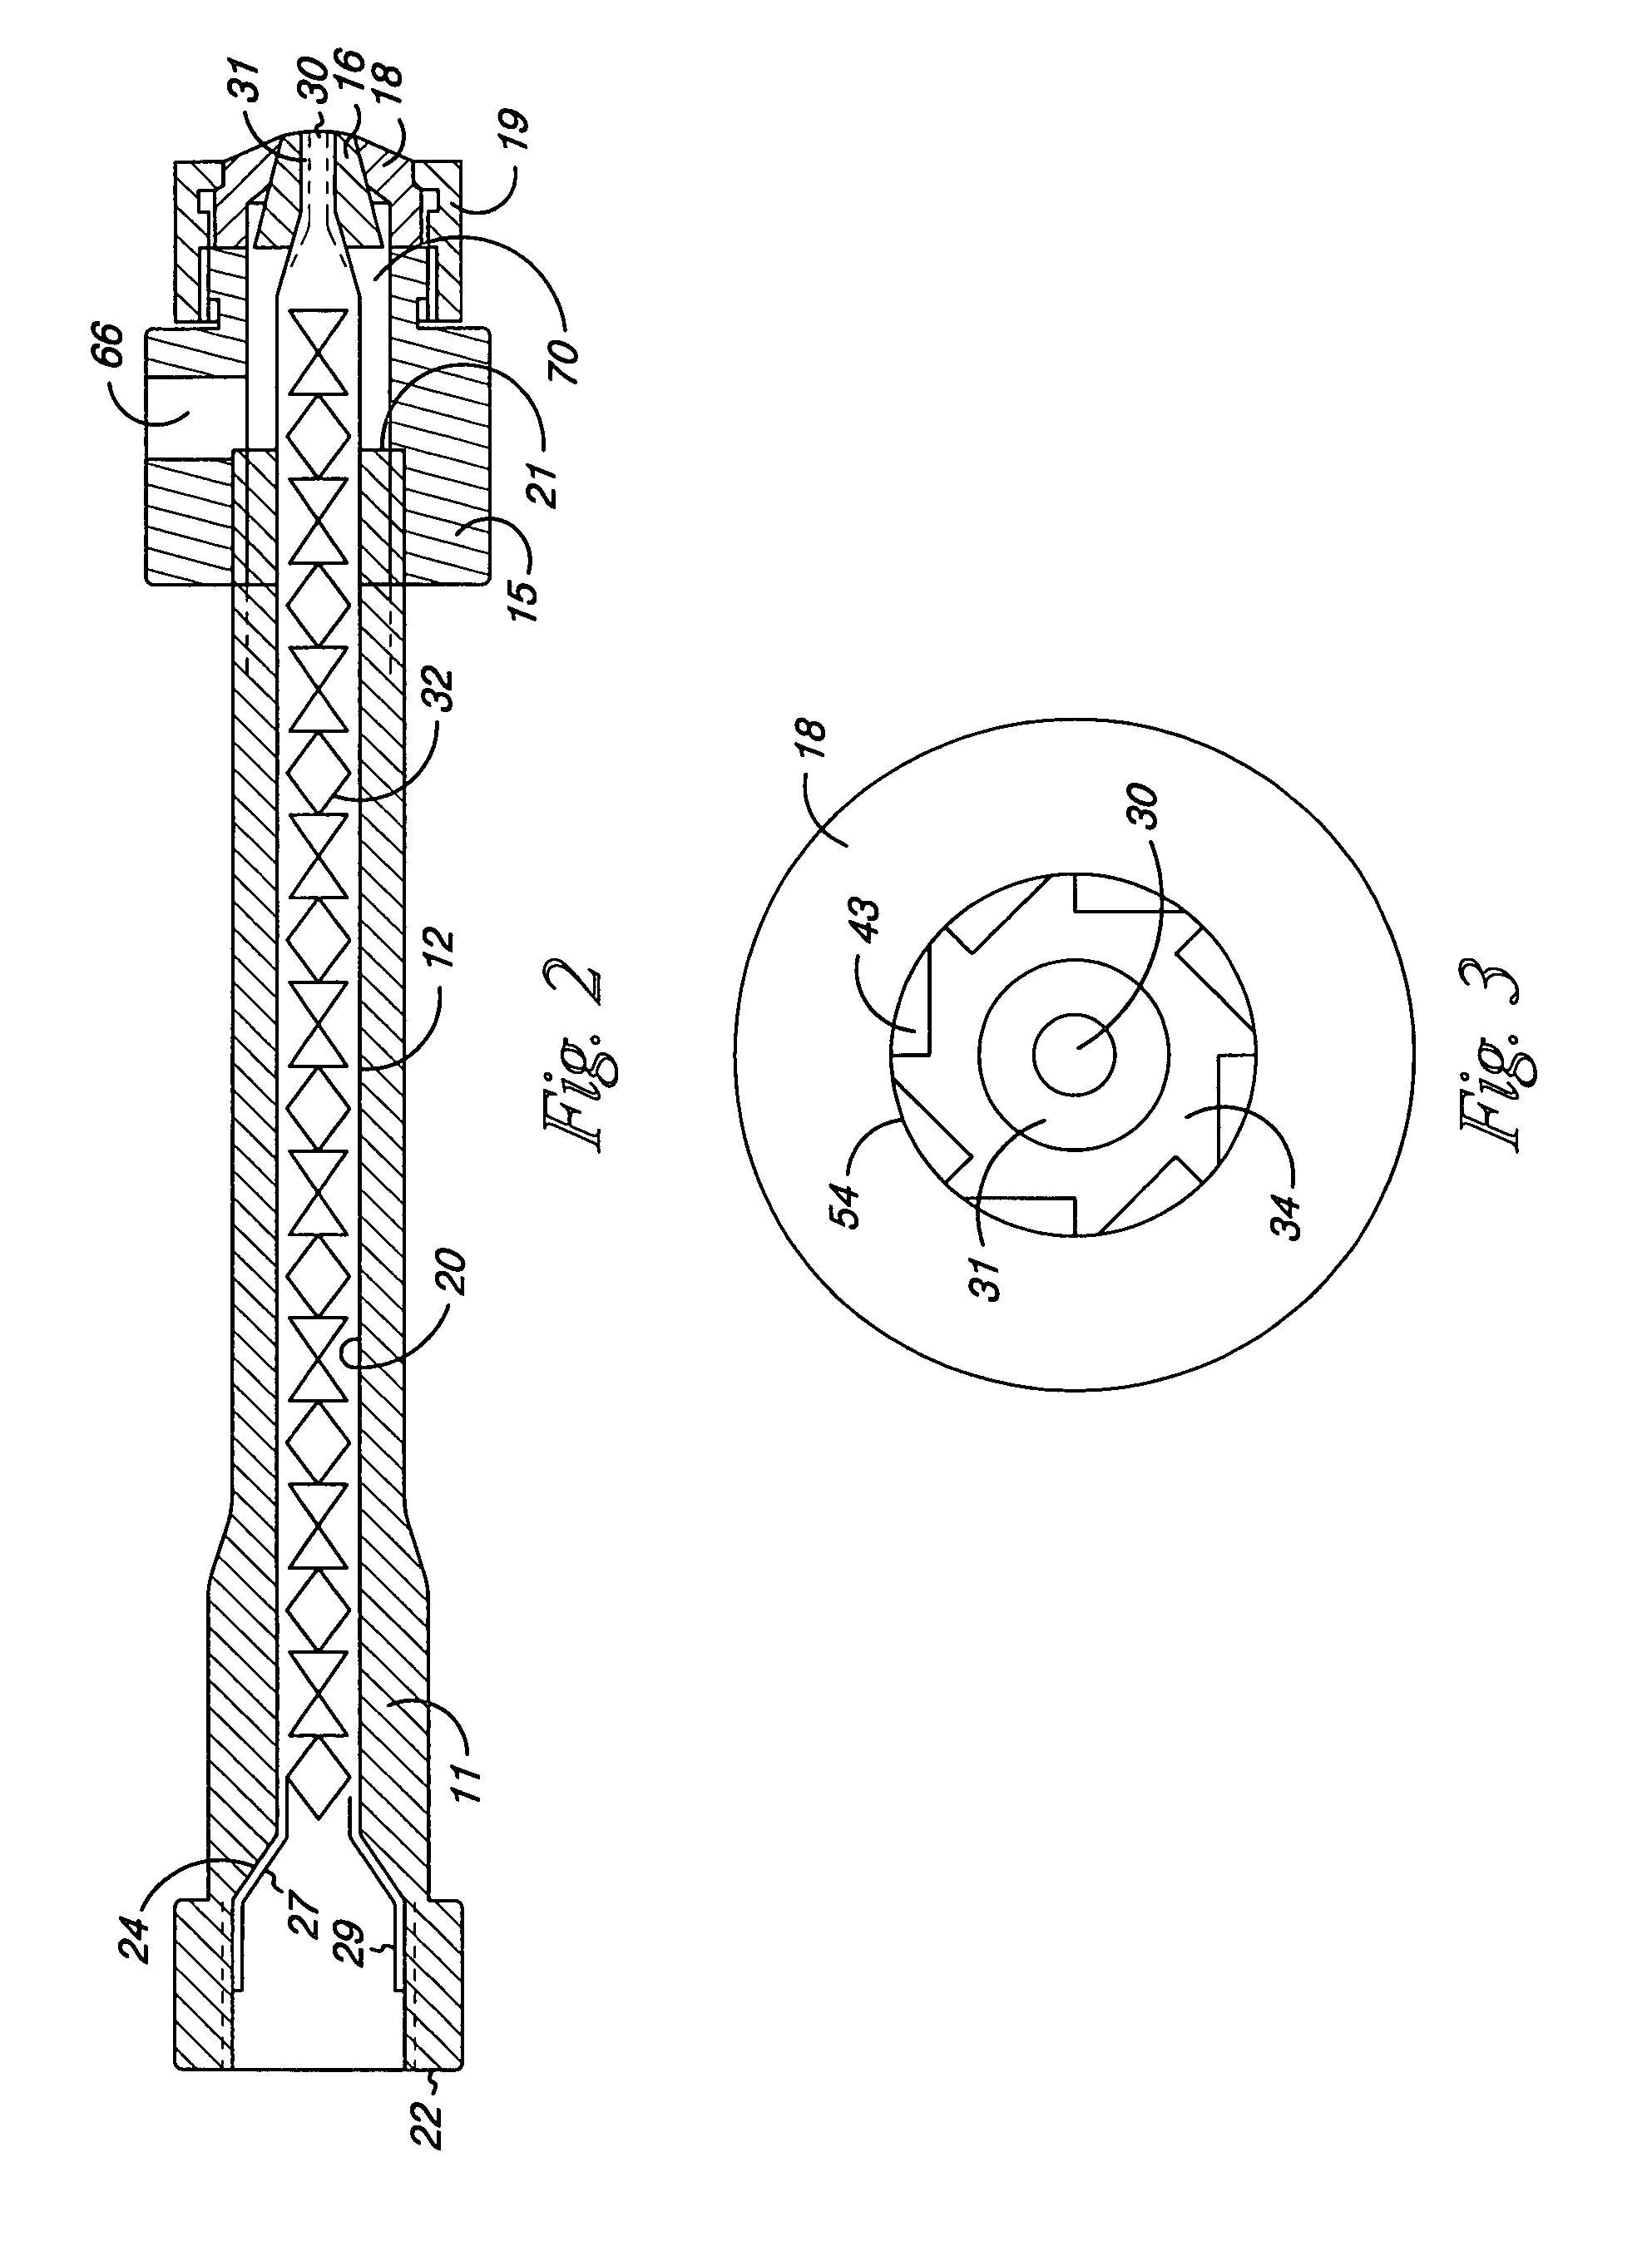 Spray head and air atomizing assembly